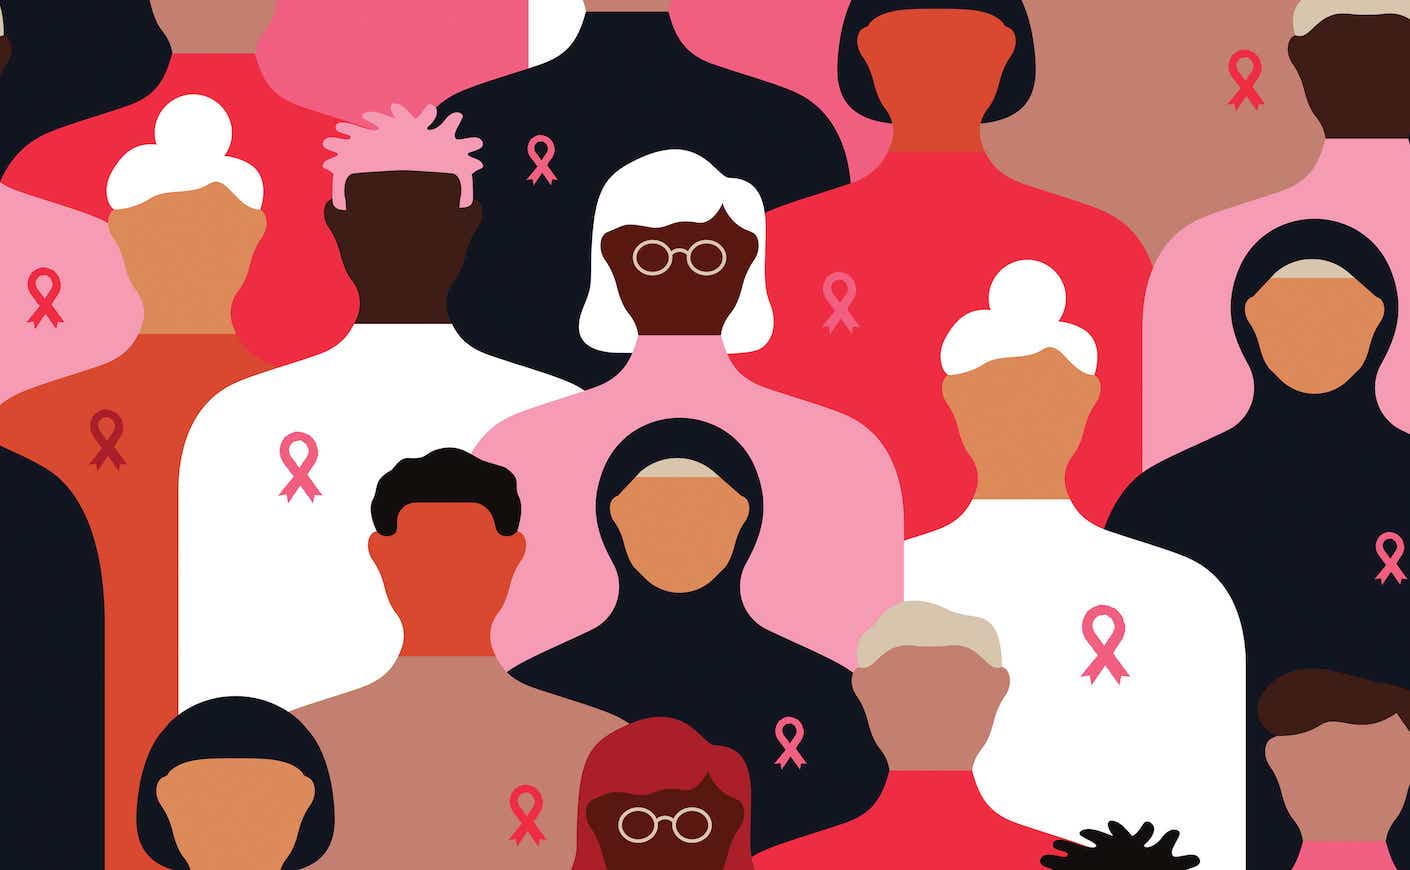 illustration of a diverse group of people wearing breast cancer ribbons